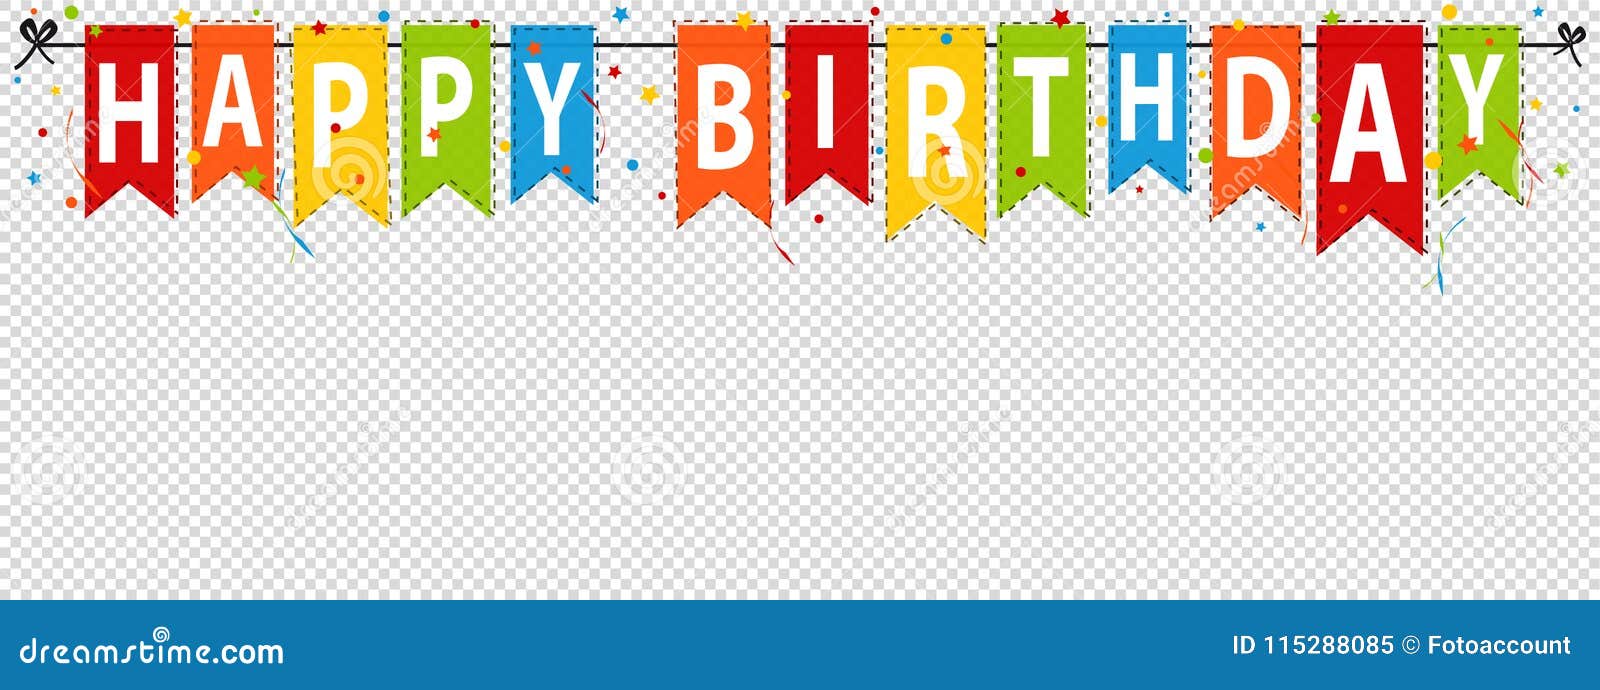 Happy Birthday Banner, Background - Editable Vector Illustration - Isolated on Transparent Stock Vector - Illustration of card, banner: 115288085